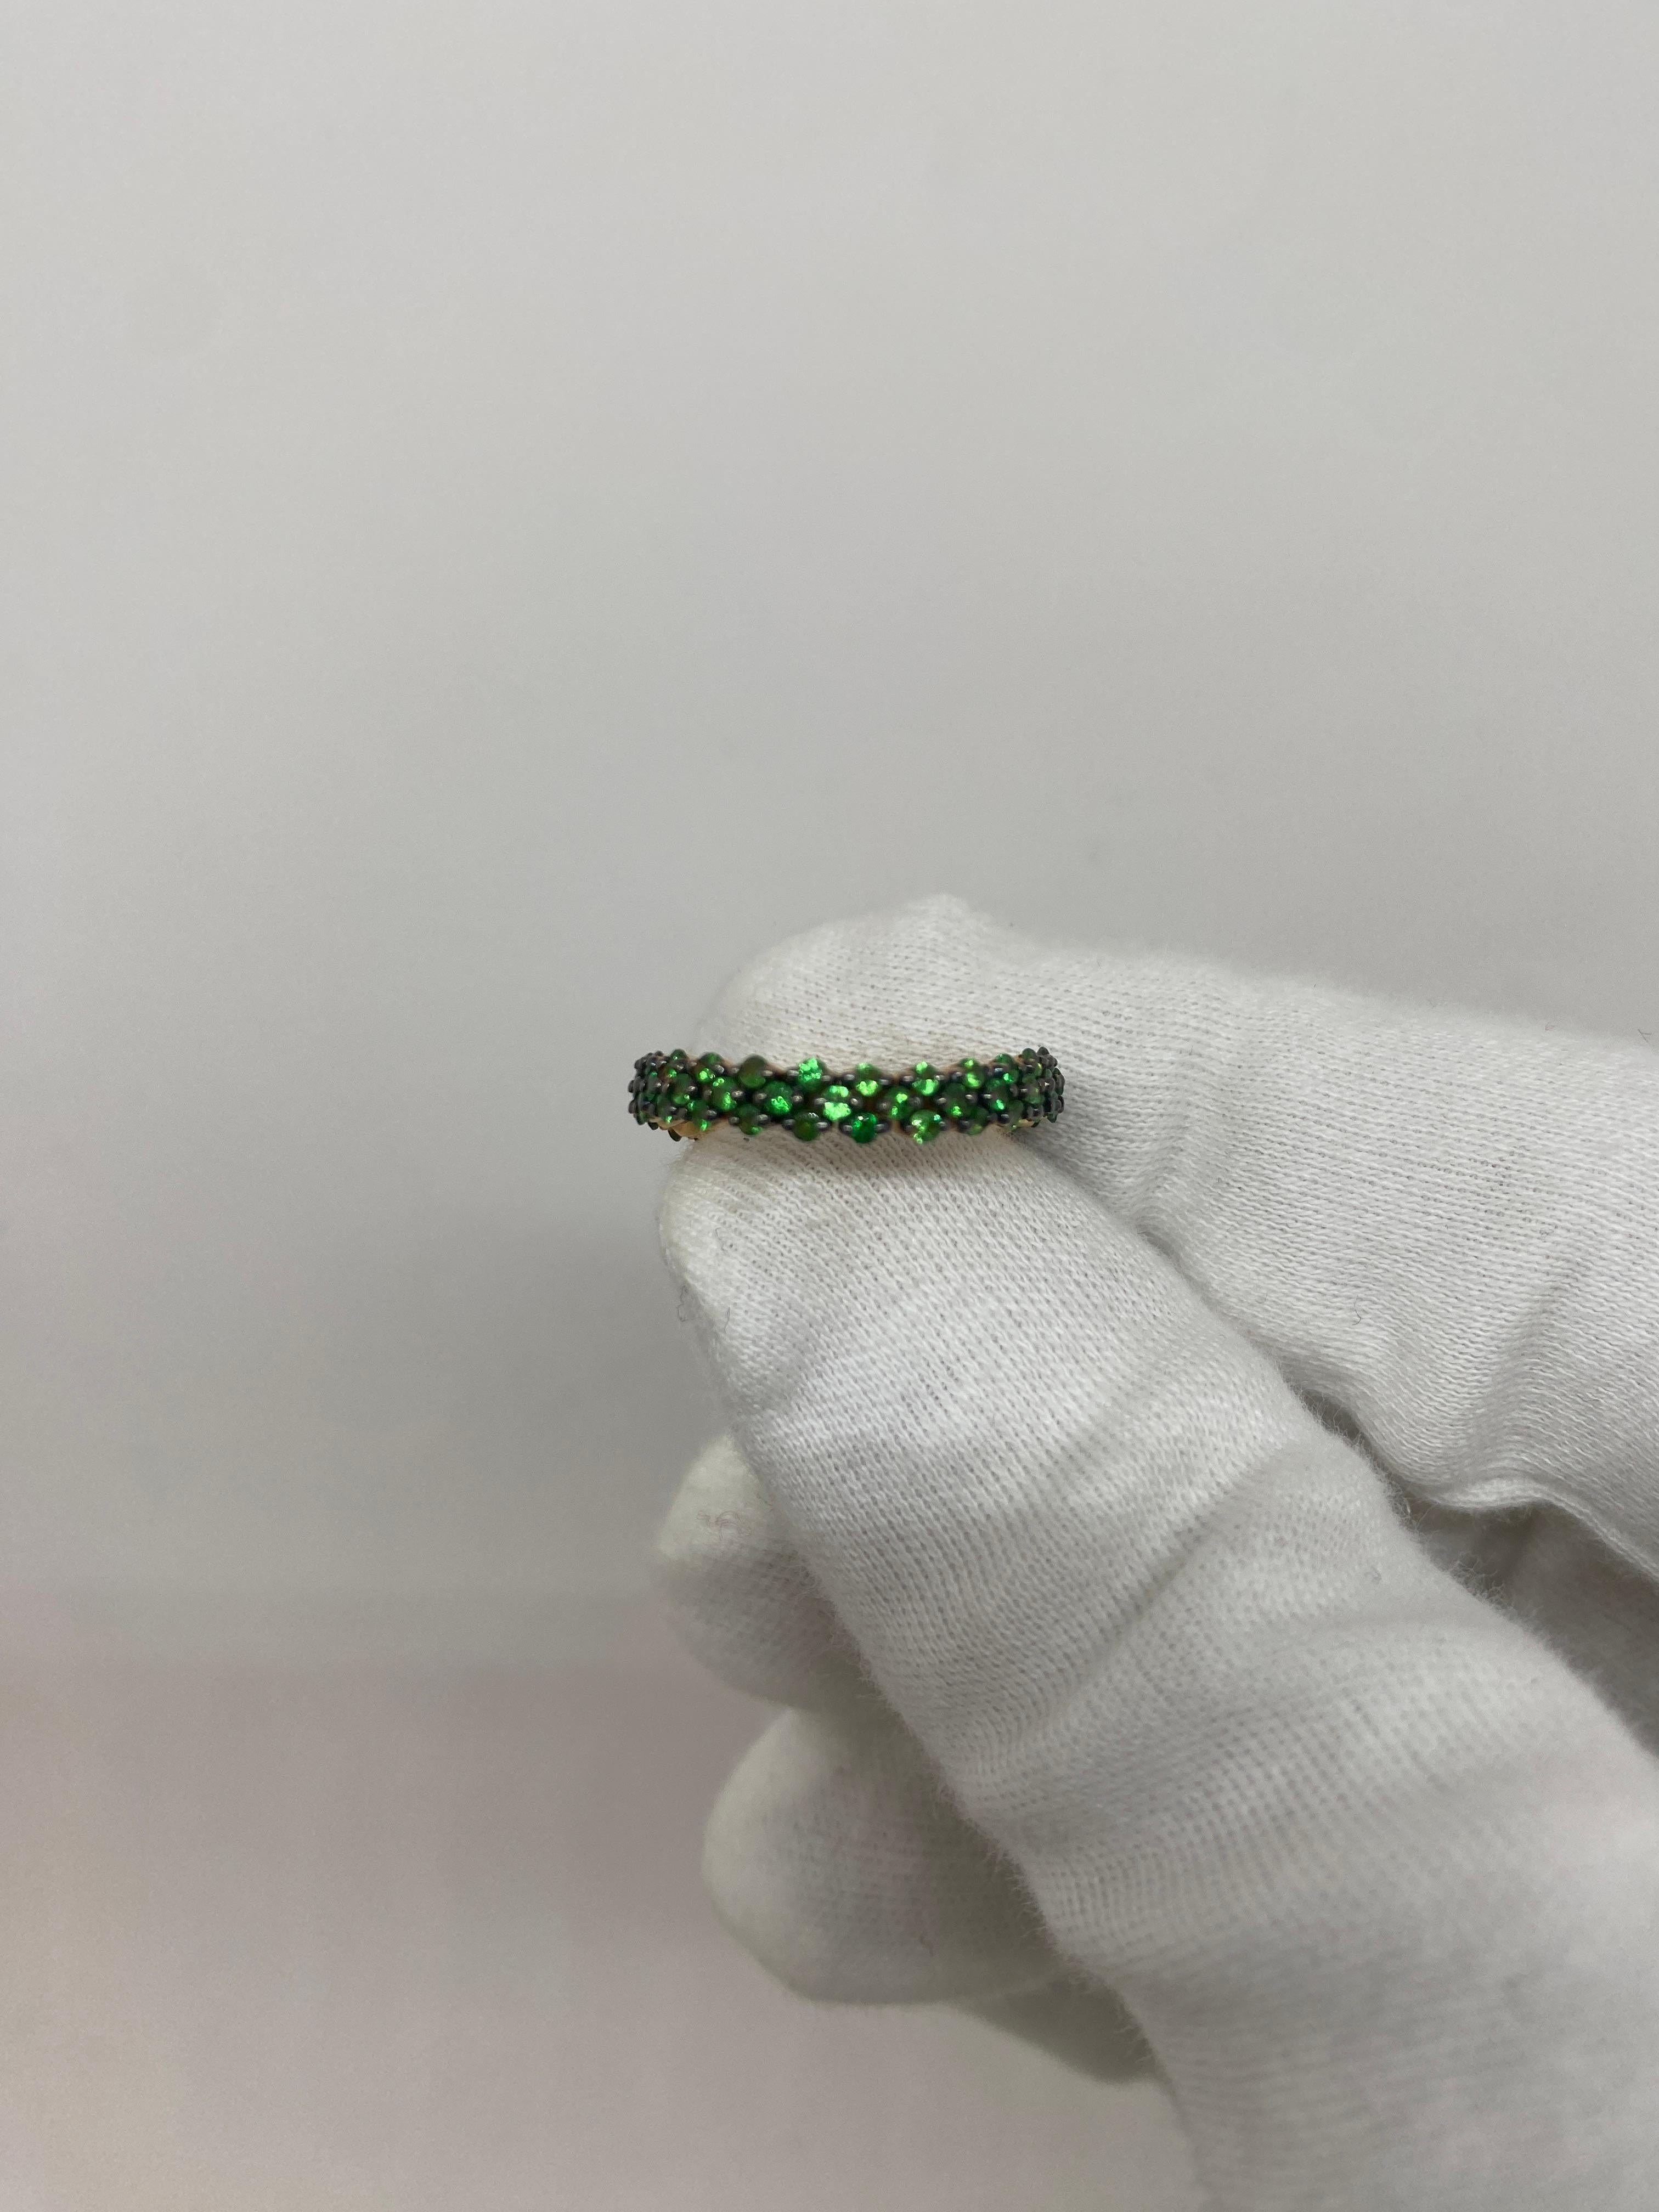 Brilliant Cut 18Kt Rose Gold Riviere Ring Natural Tsavorite 1.33 Ct For Sale